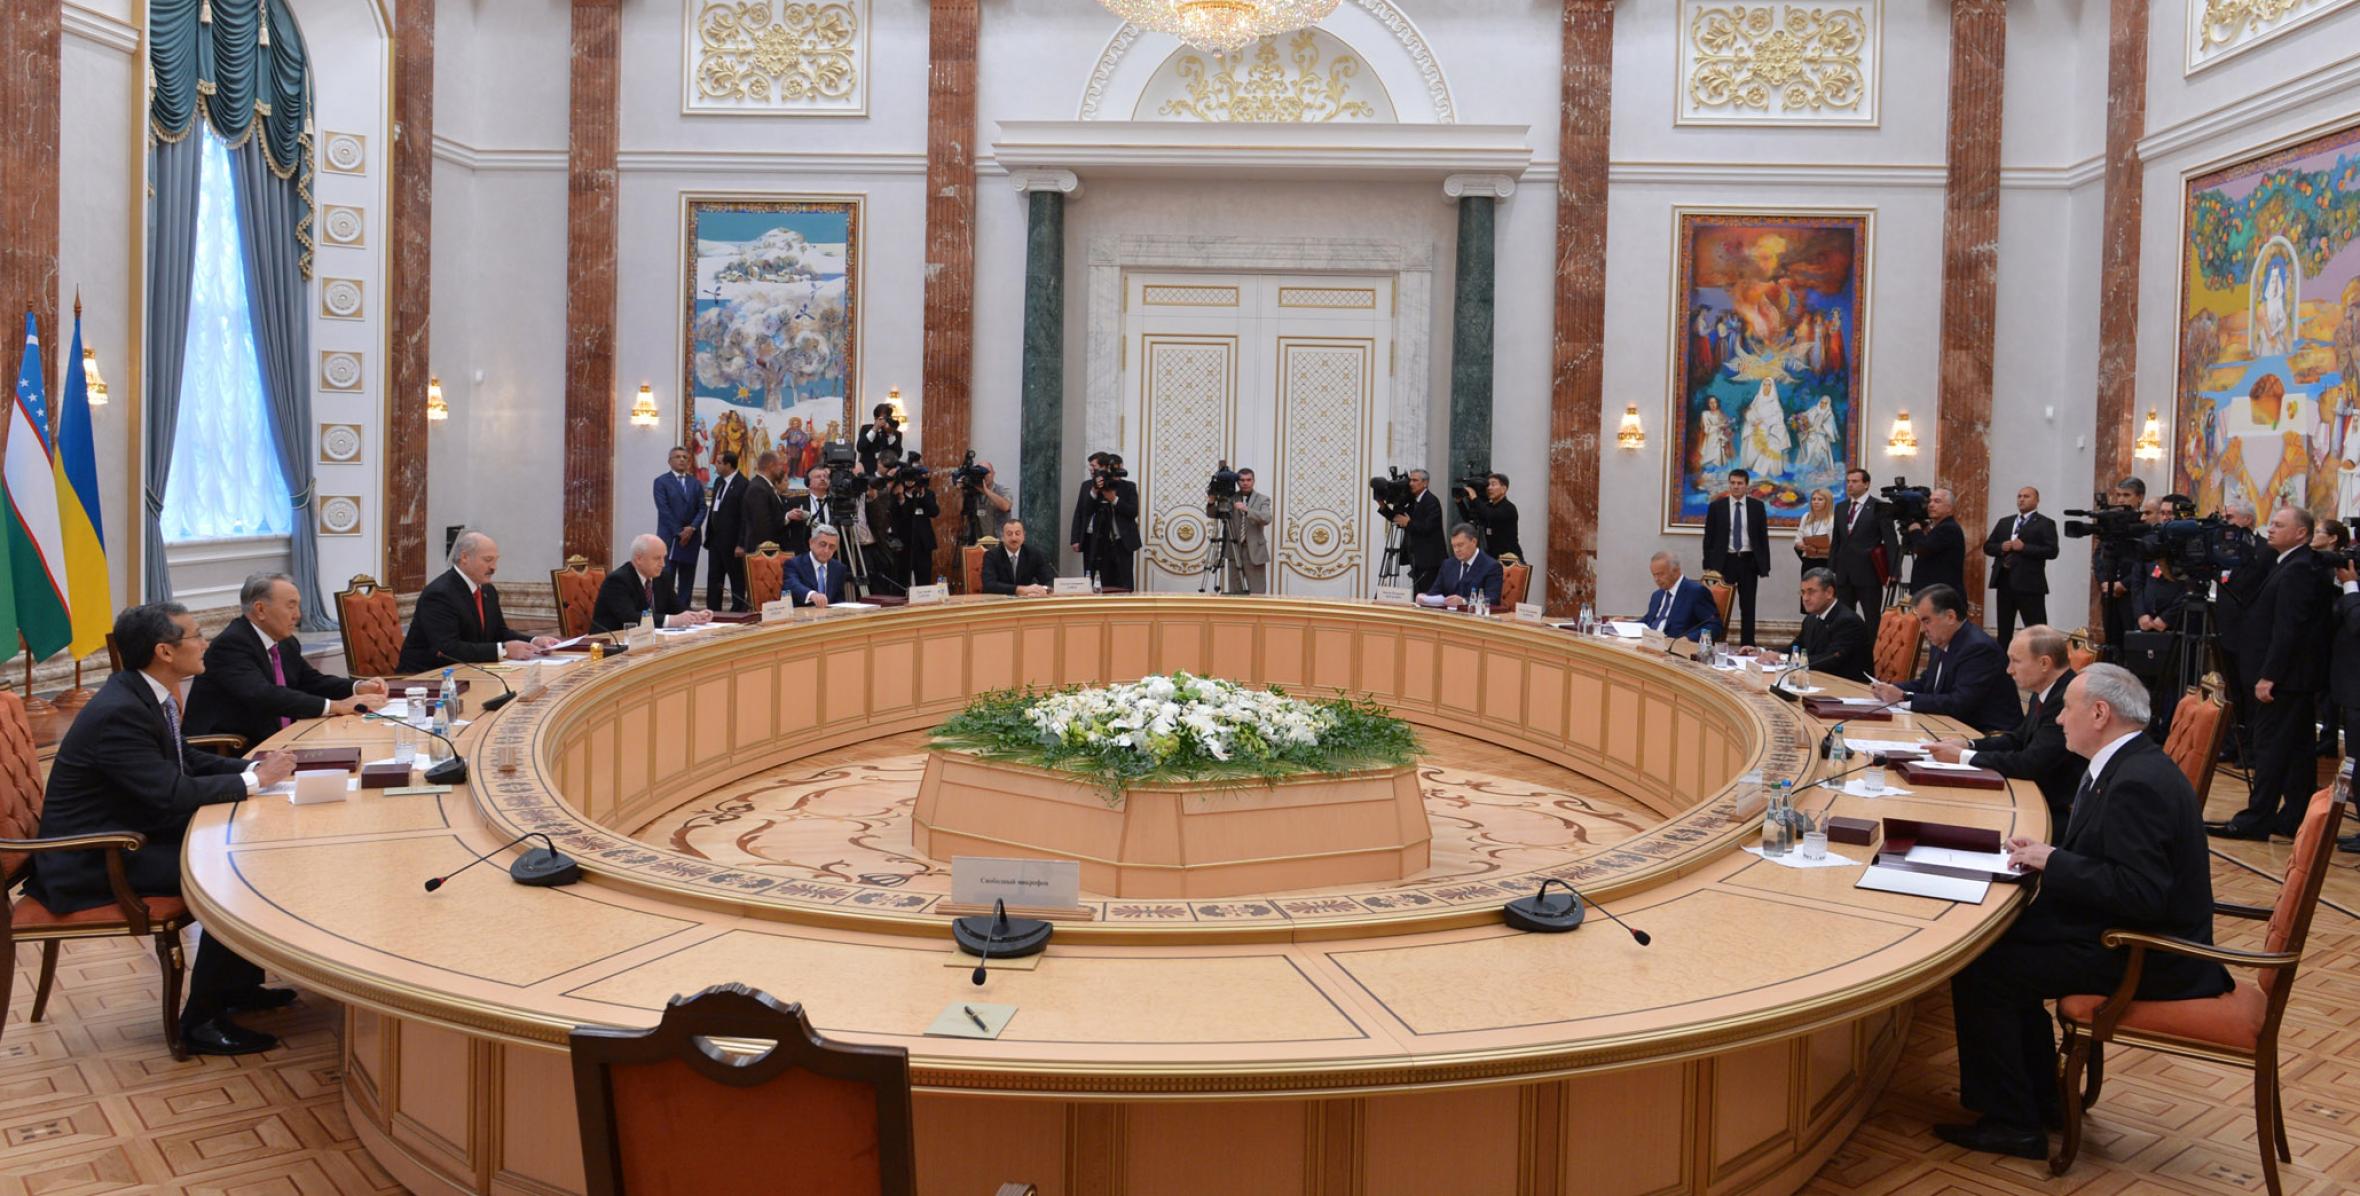 Ilham Aliyev attended a meeting of the Council of CIS Heads of State